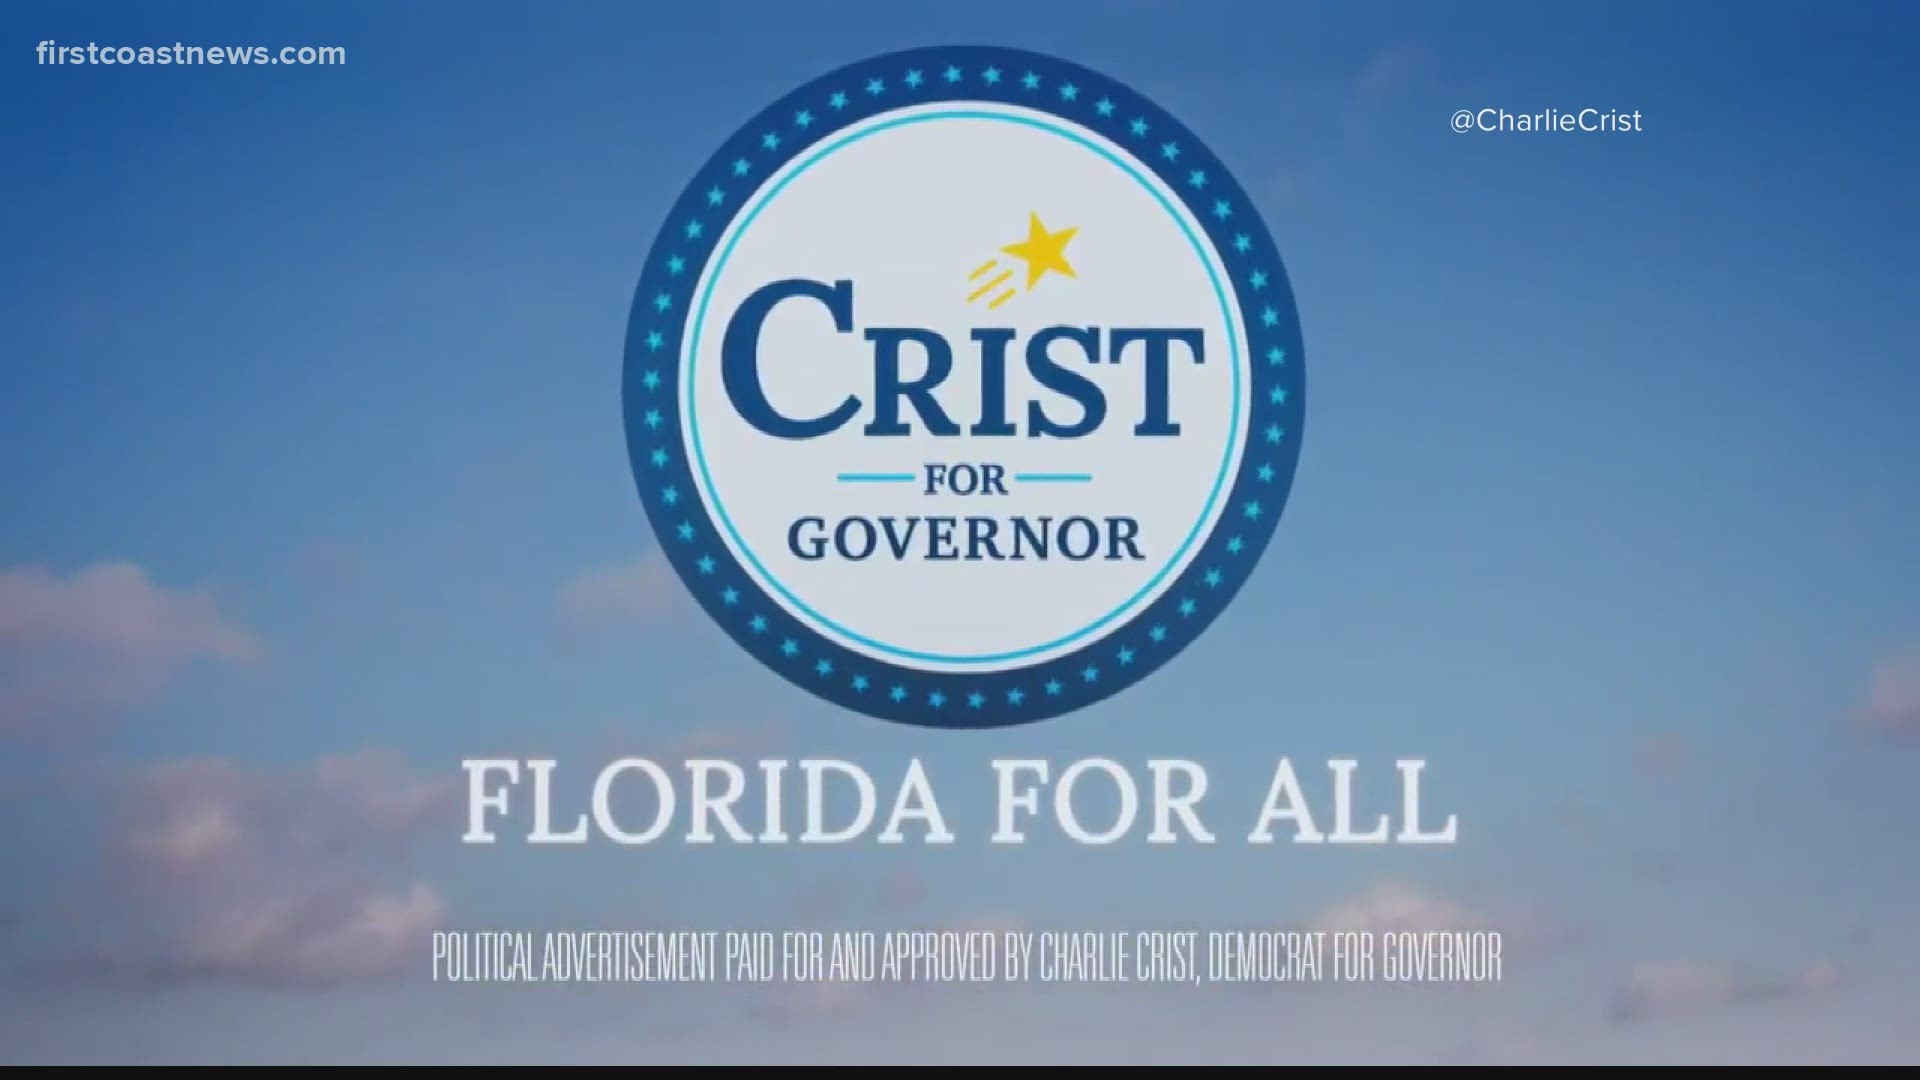 Charlie Crist announced a run for Florida Governor on Tuesday.